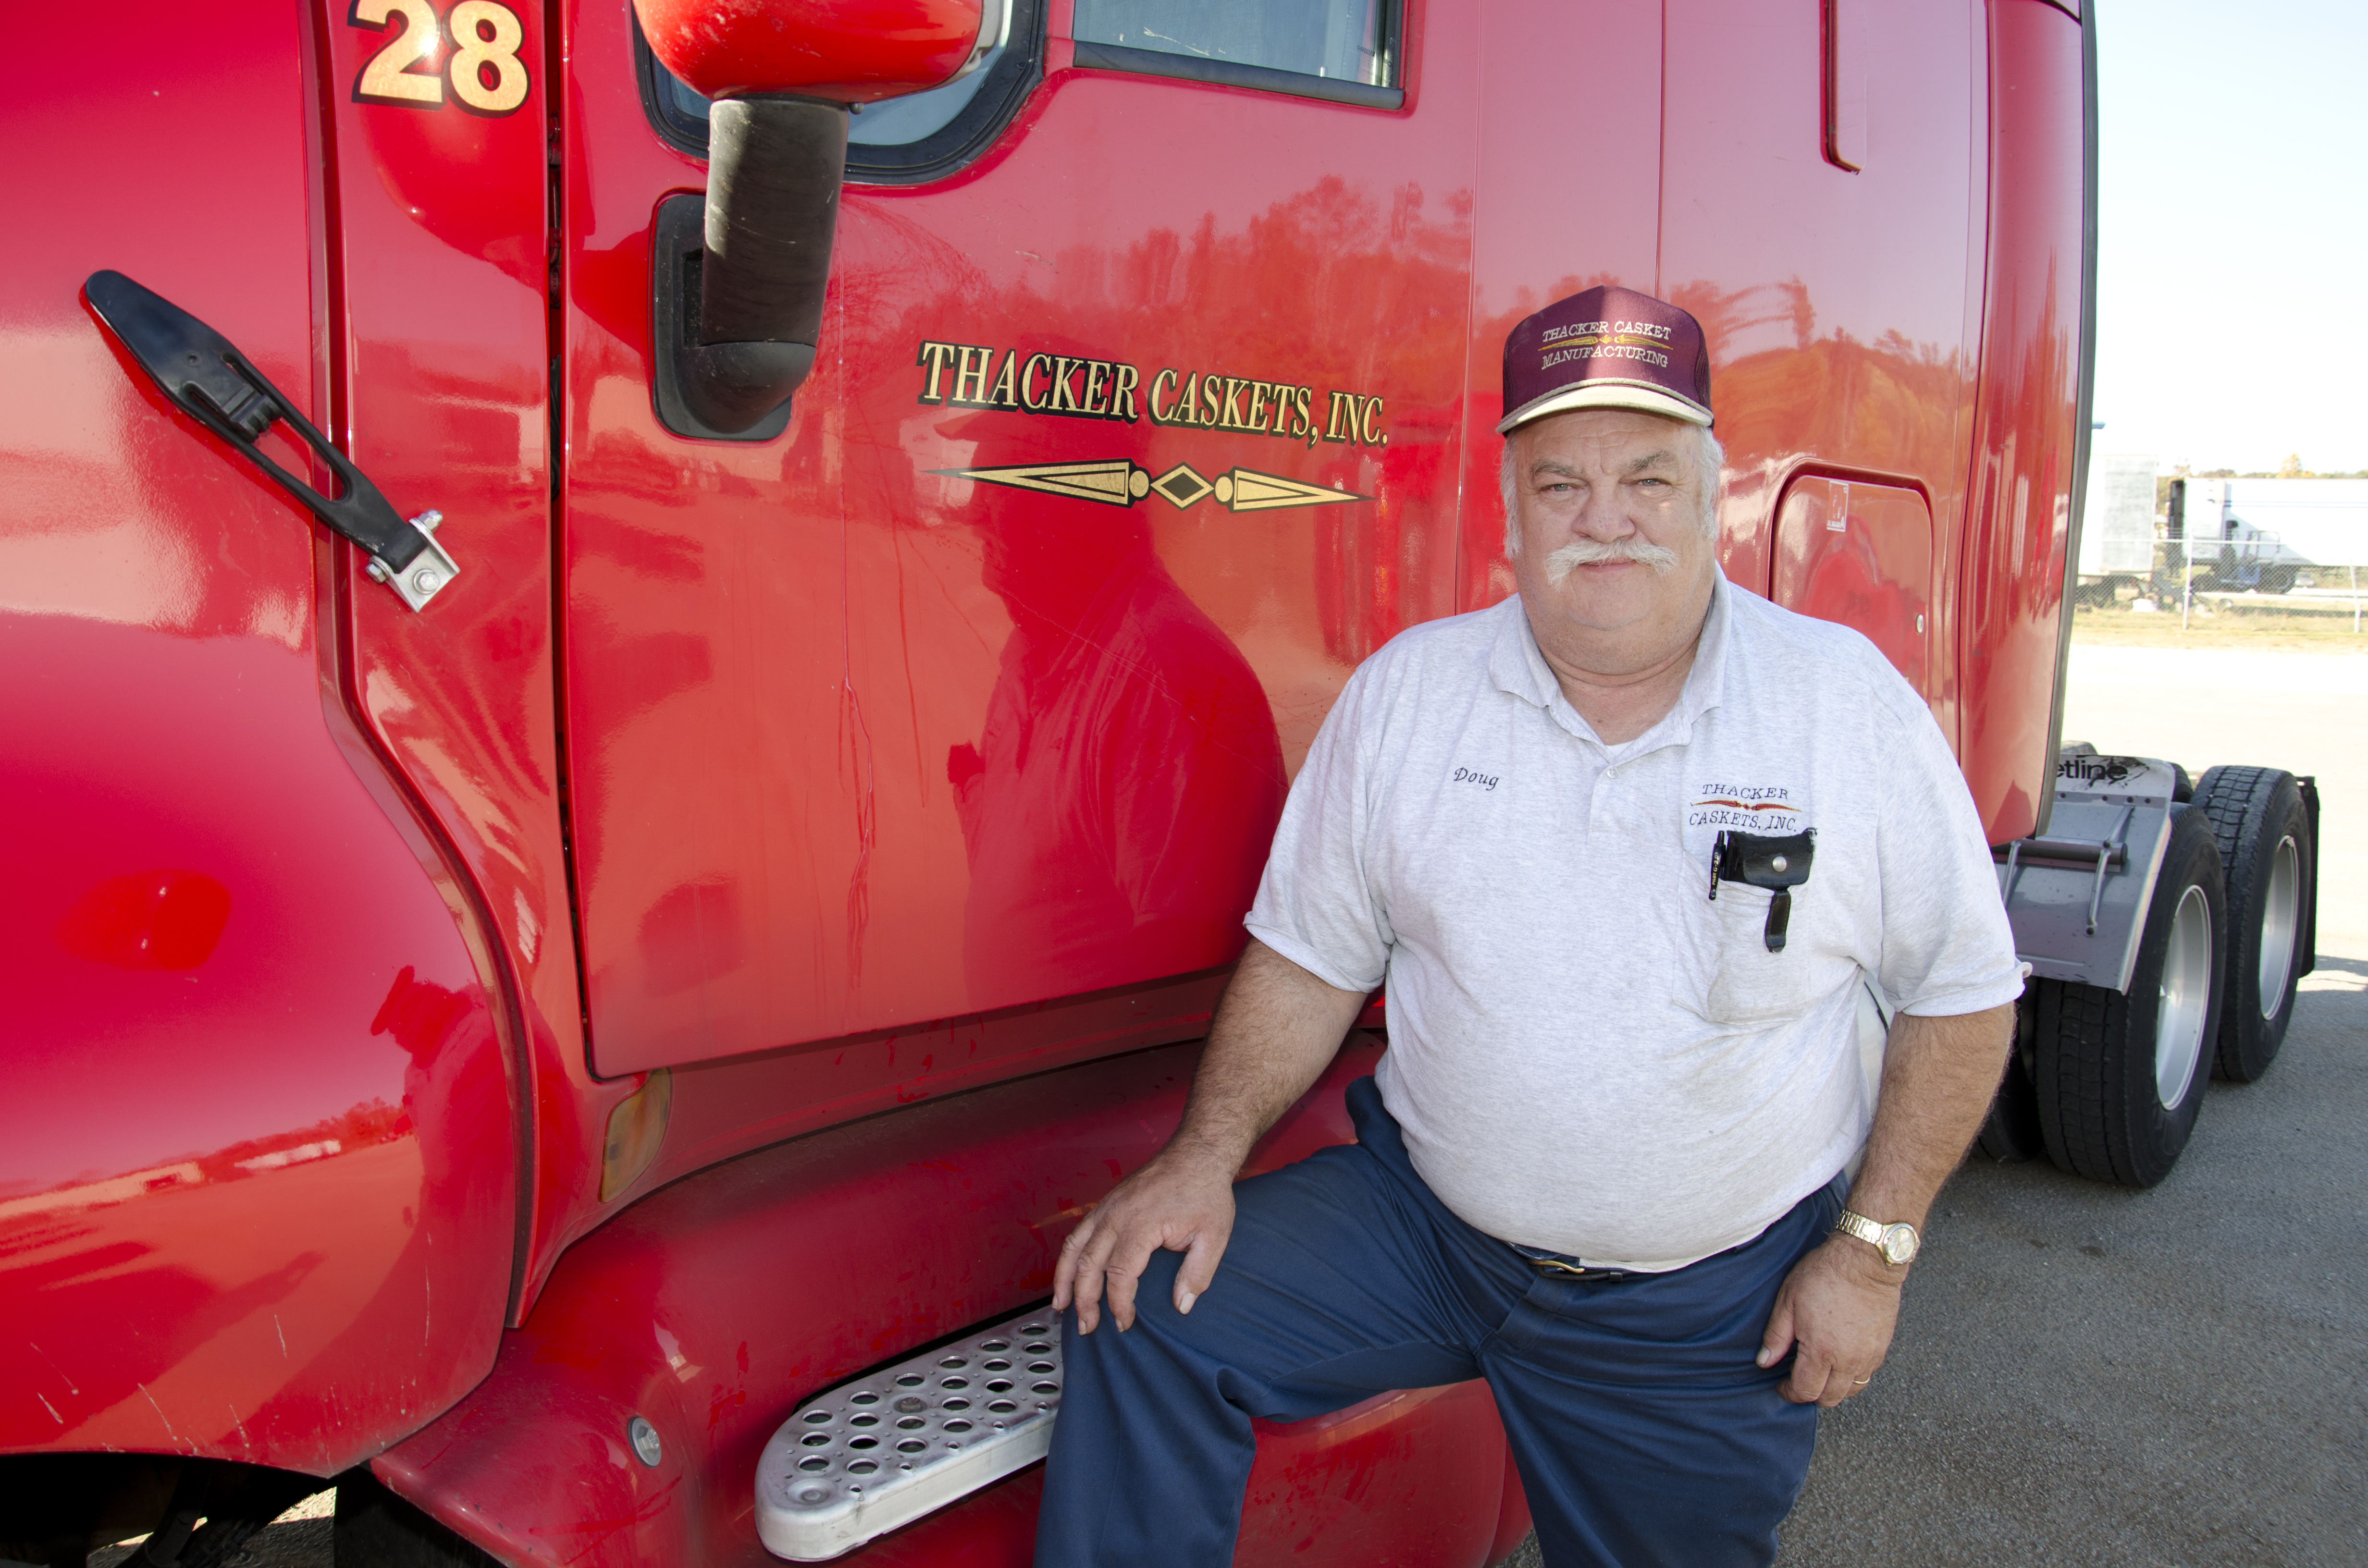 Doug Troup has worked as a tractor trailer driver for Thacker & Loretto Casket for almost 40 years. He plays a critical “behind the scenes” role in making sure product gets to where it needs to be.